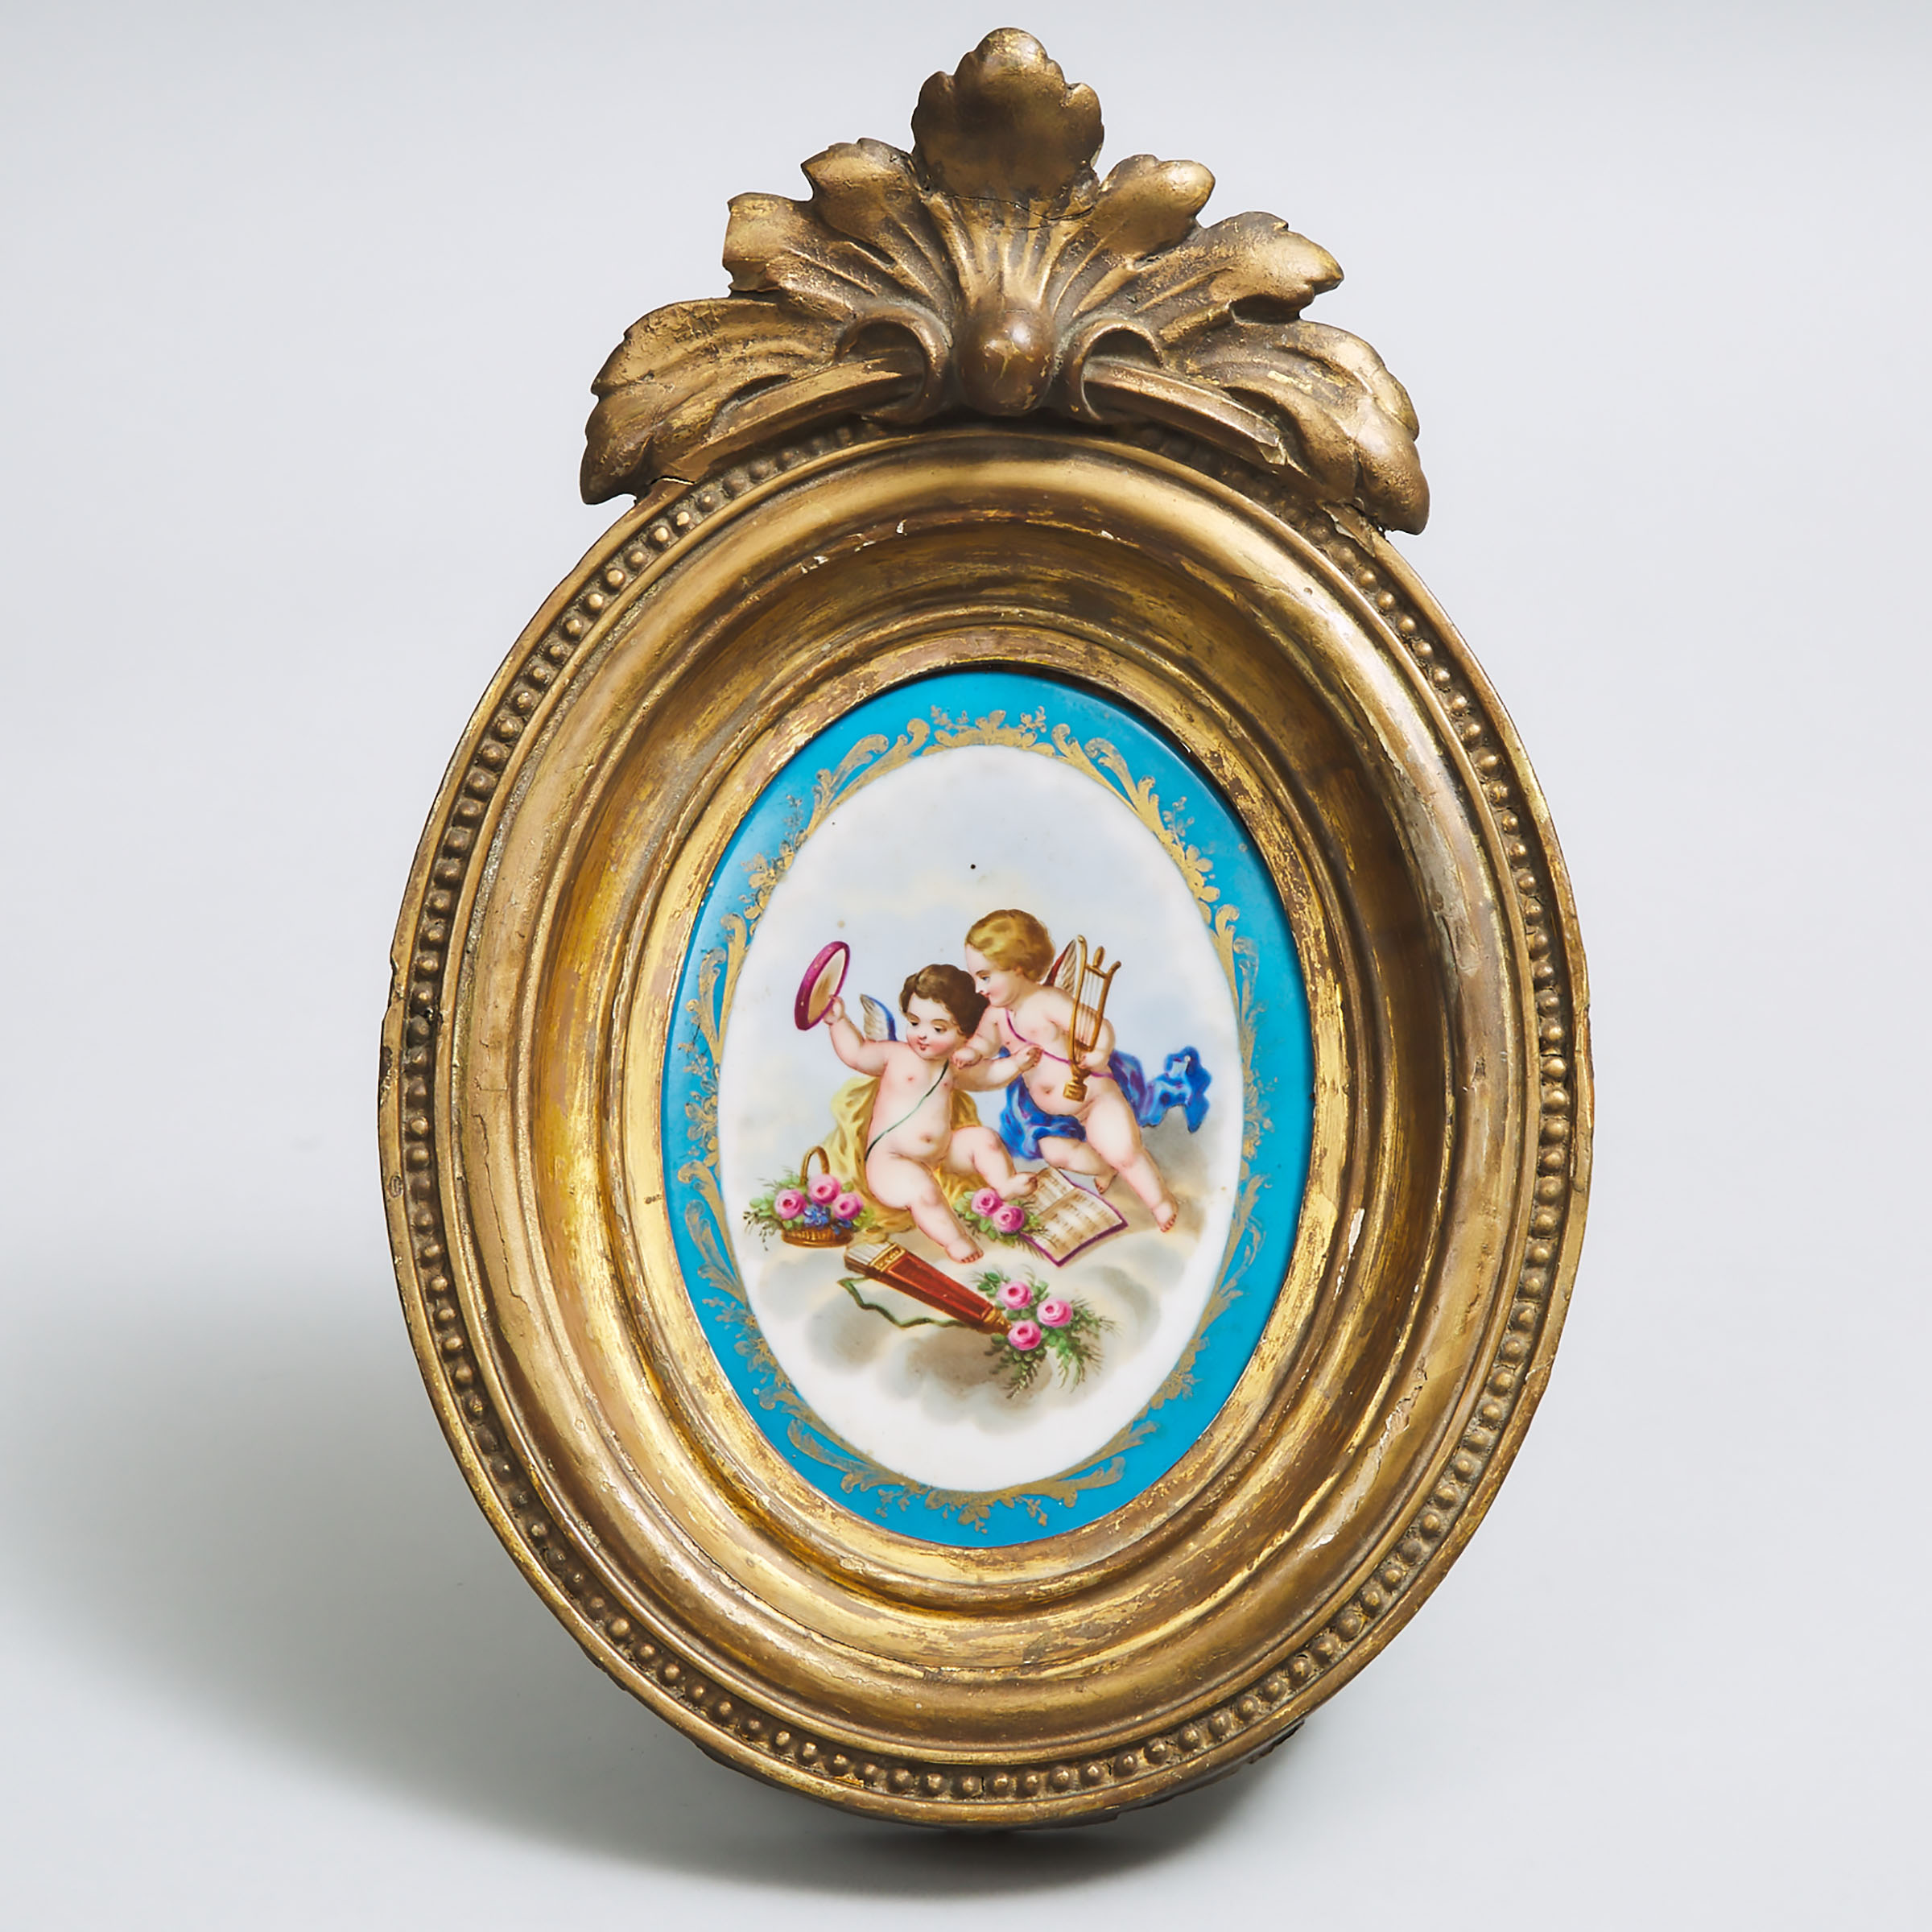 'Sèvres' Oval Plaque, late 19th century